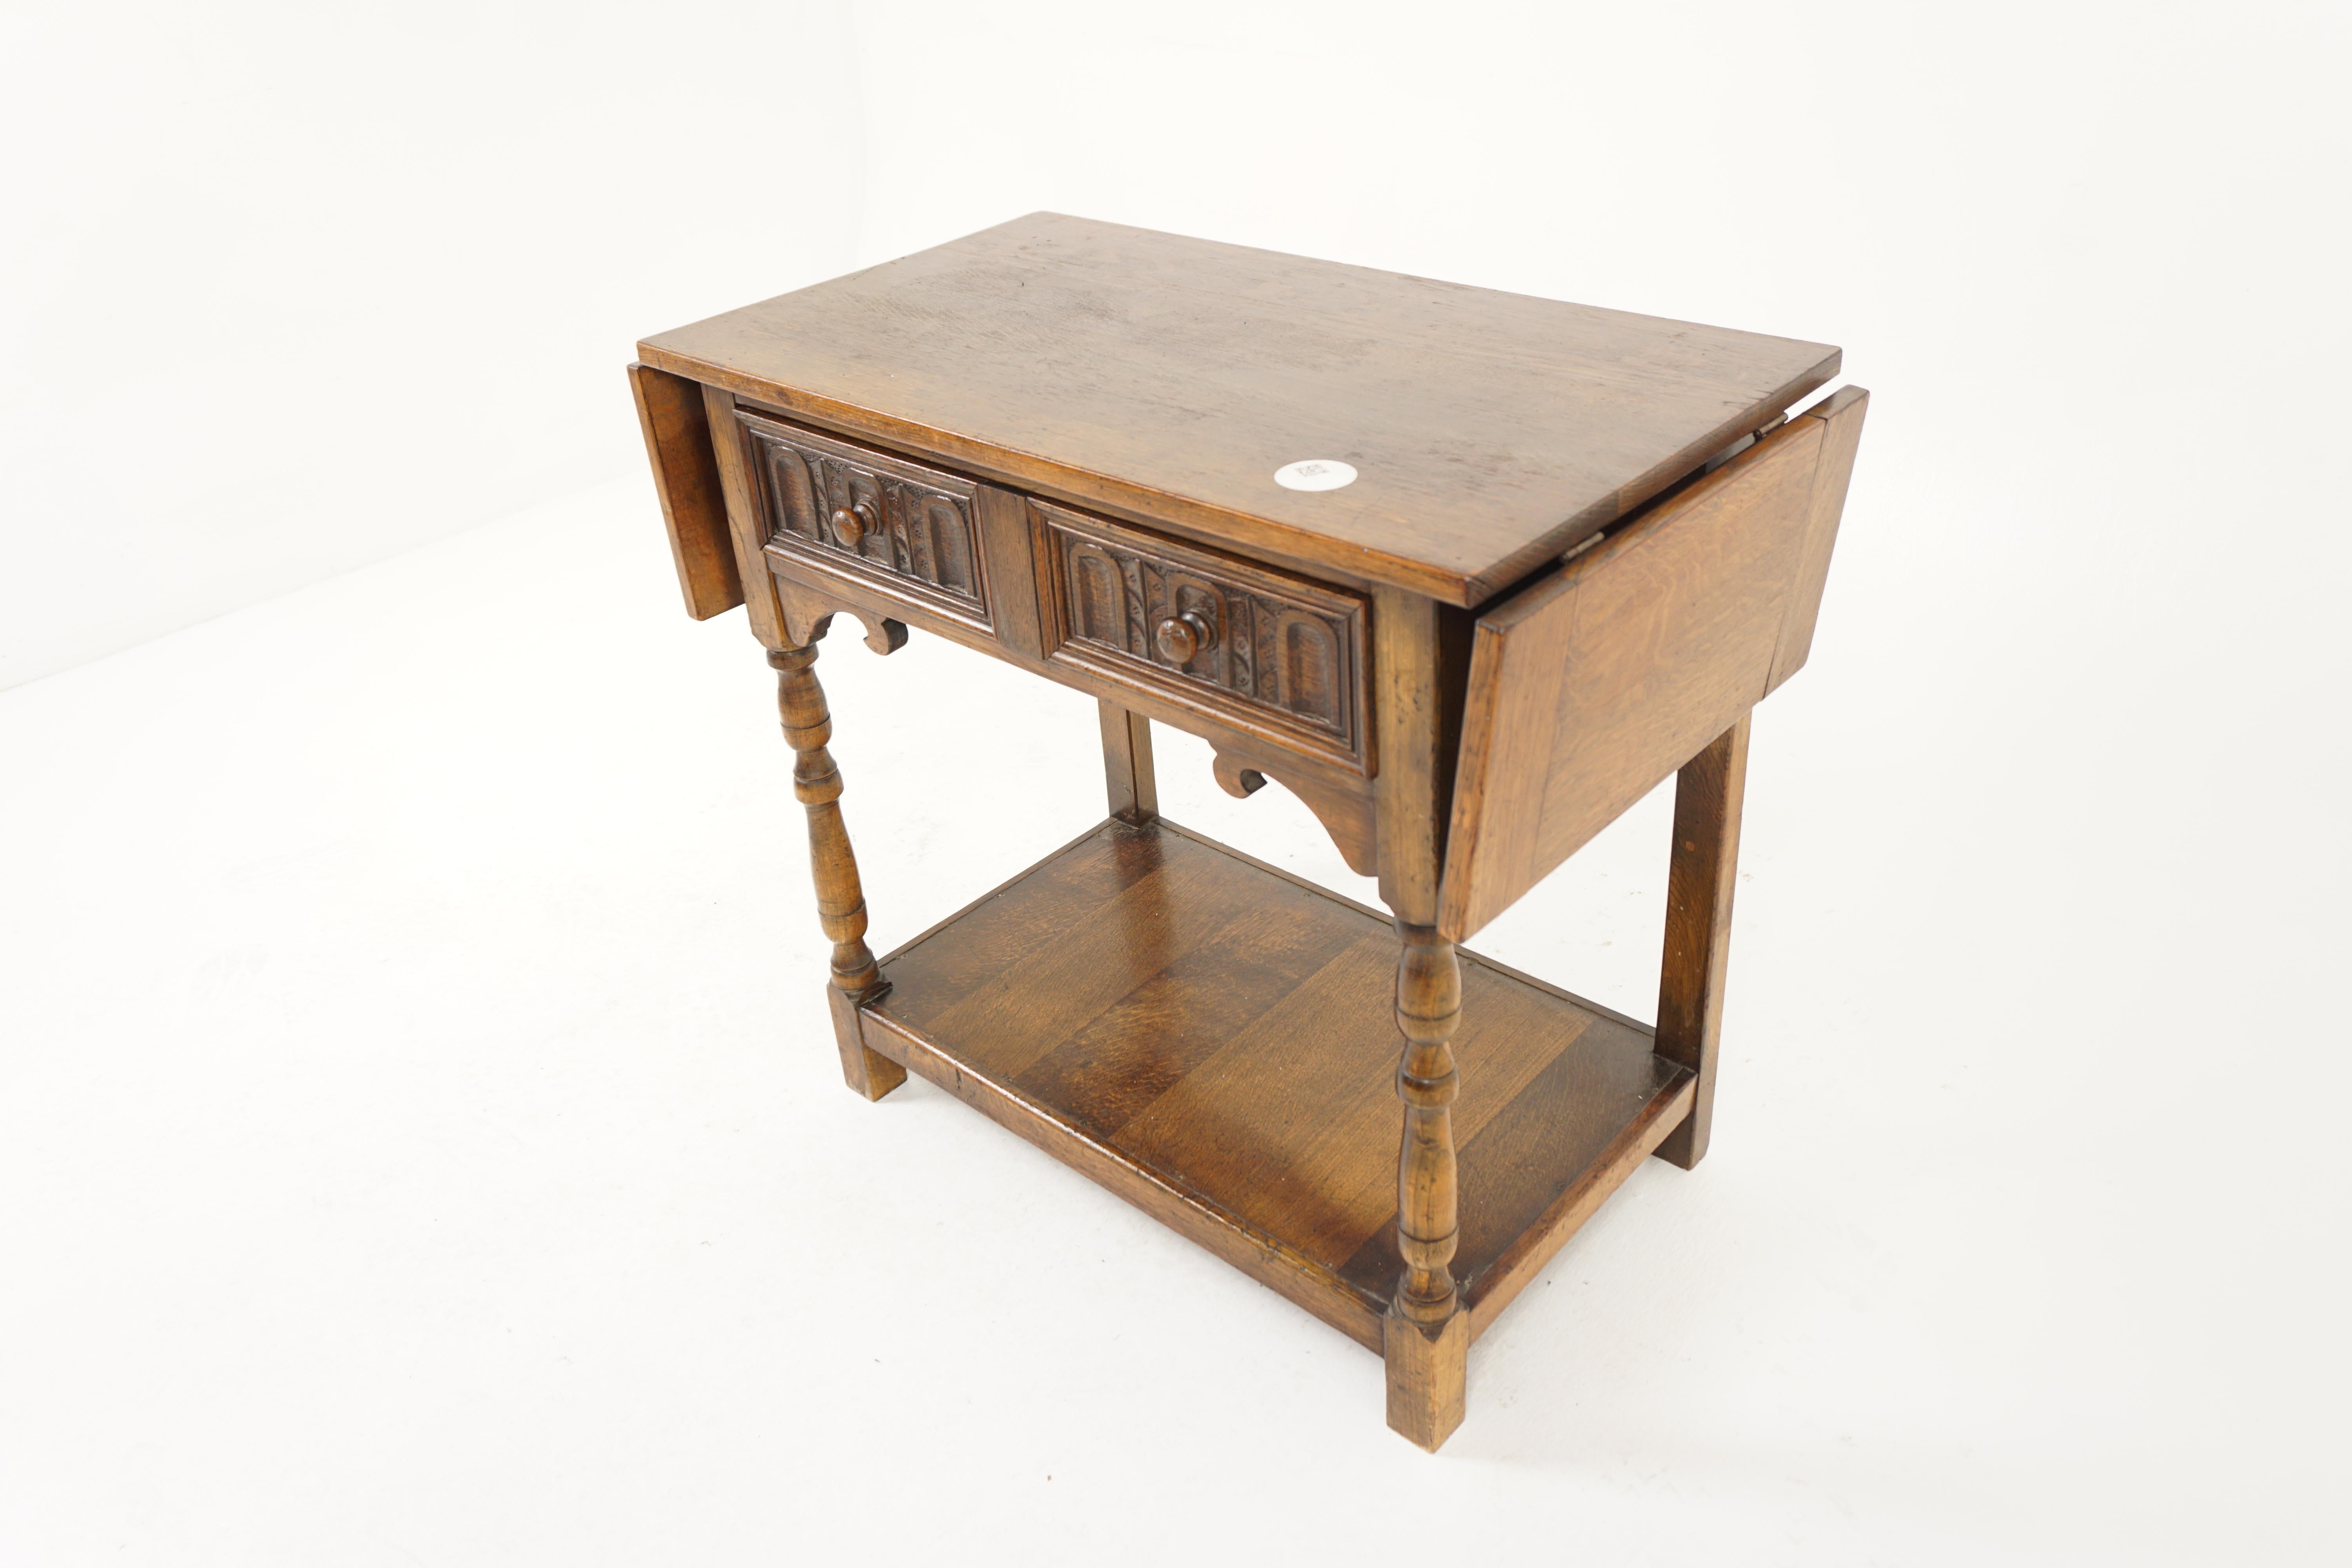 Antique Oak Table, Vintage Serving Table with Leaves, Hall Table, Server, Antique Furniture, Scotland 1930, H1053

+ Scotland 1930
+ Solid Oak
+ Original Finish
+ Rectangular moulded top
+ Pair of leaves on the side
+ With single carved drawer on